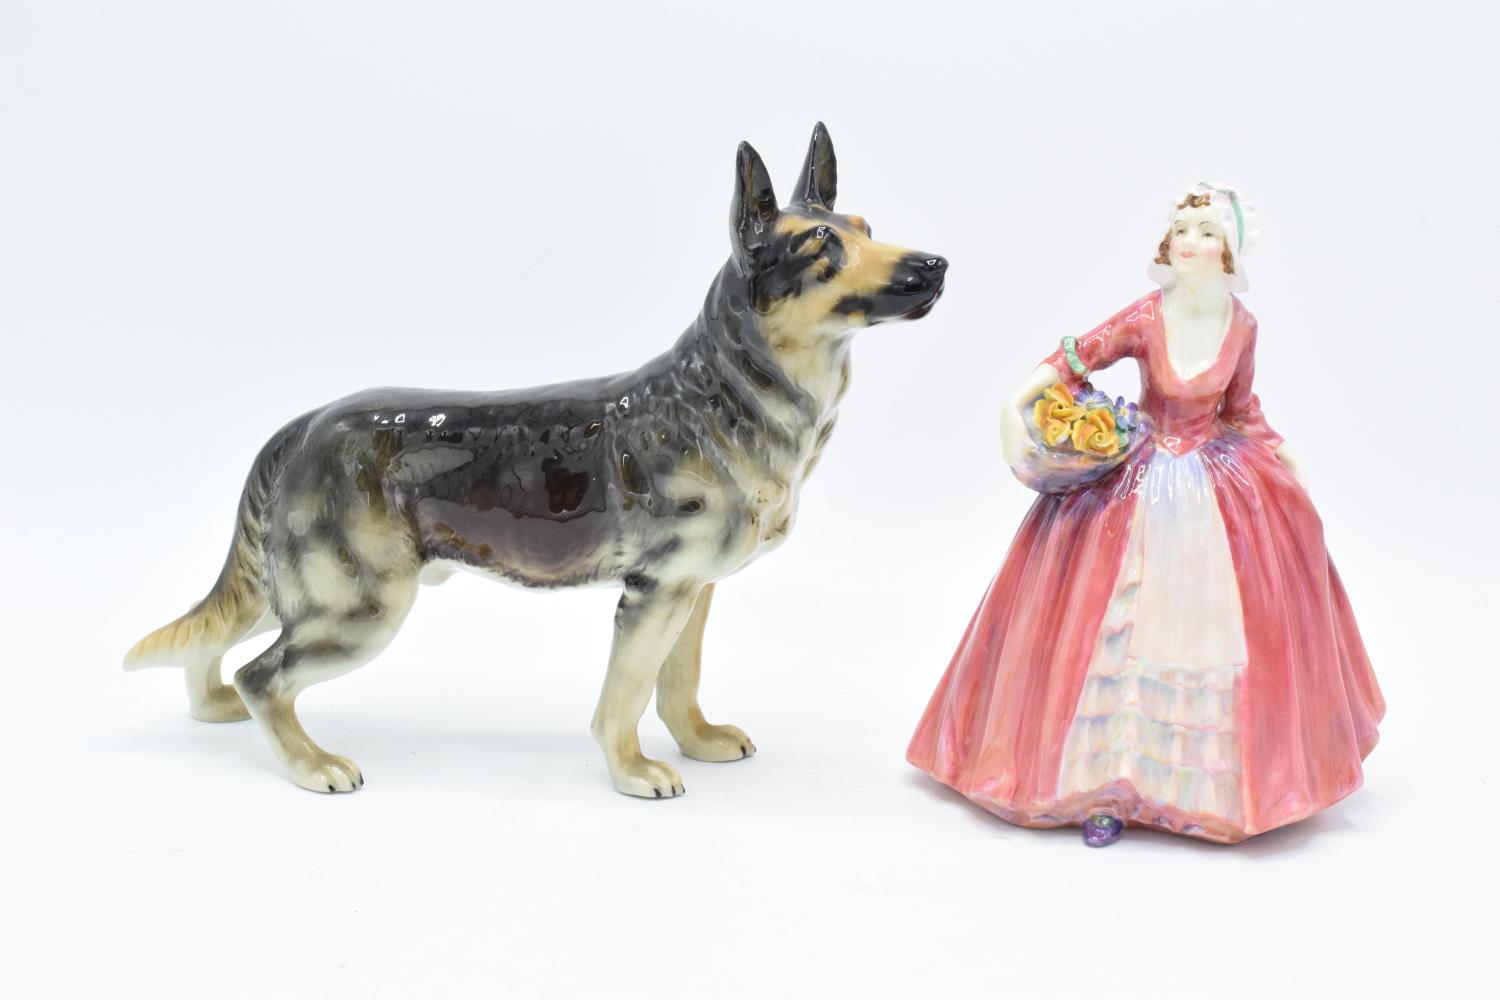 Royal Doulton lady figure Janet Hn1537 and Goebel German Shepherd CH618 (2). In good condition